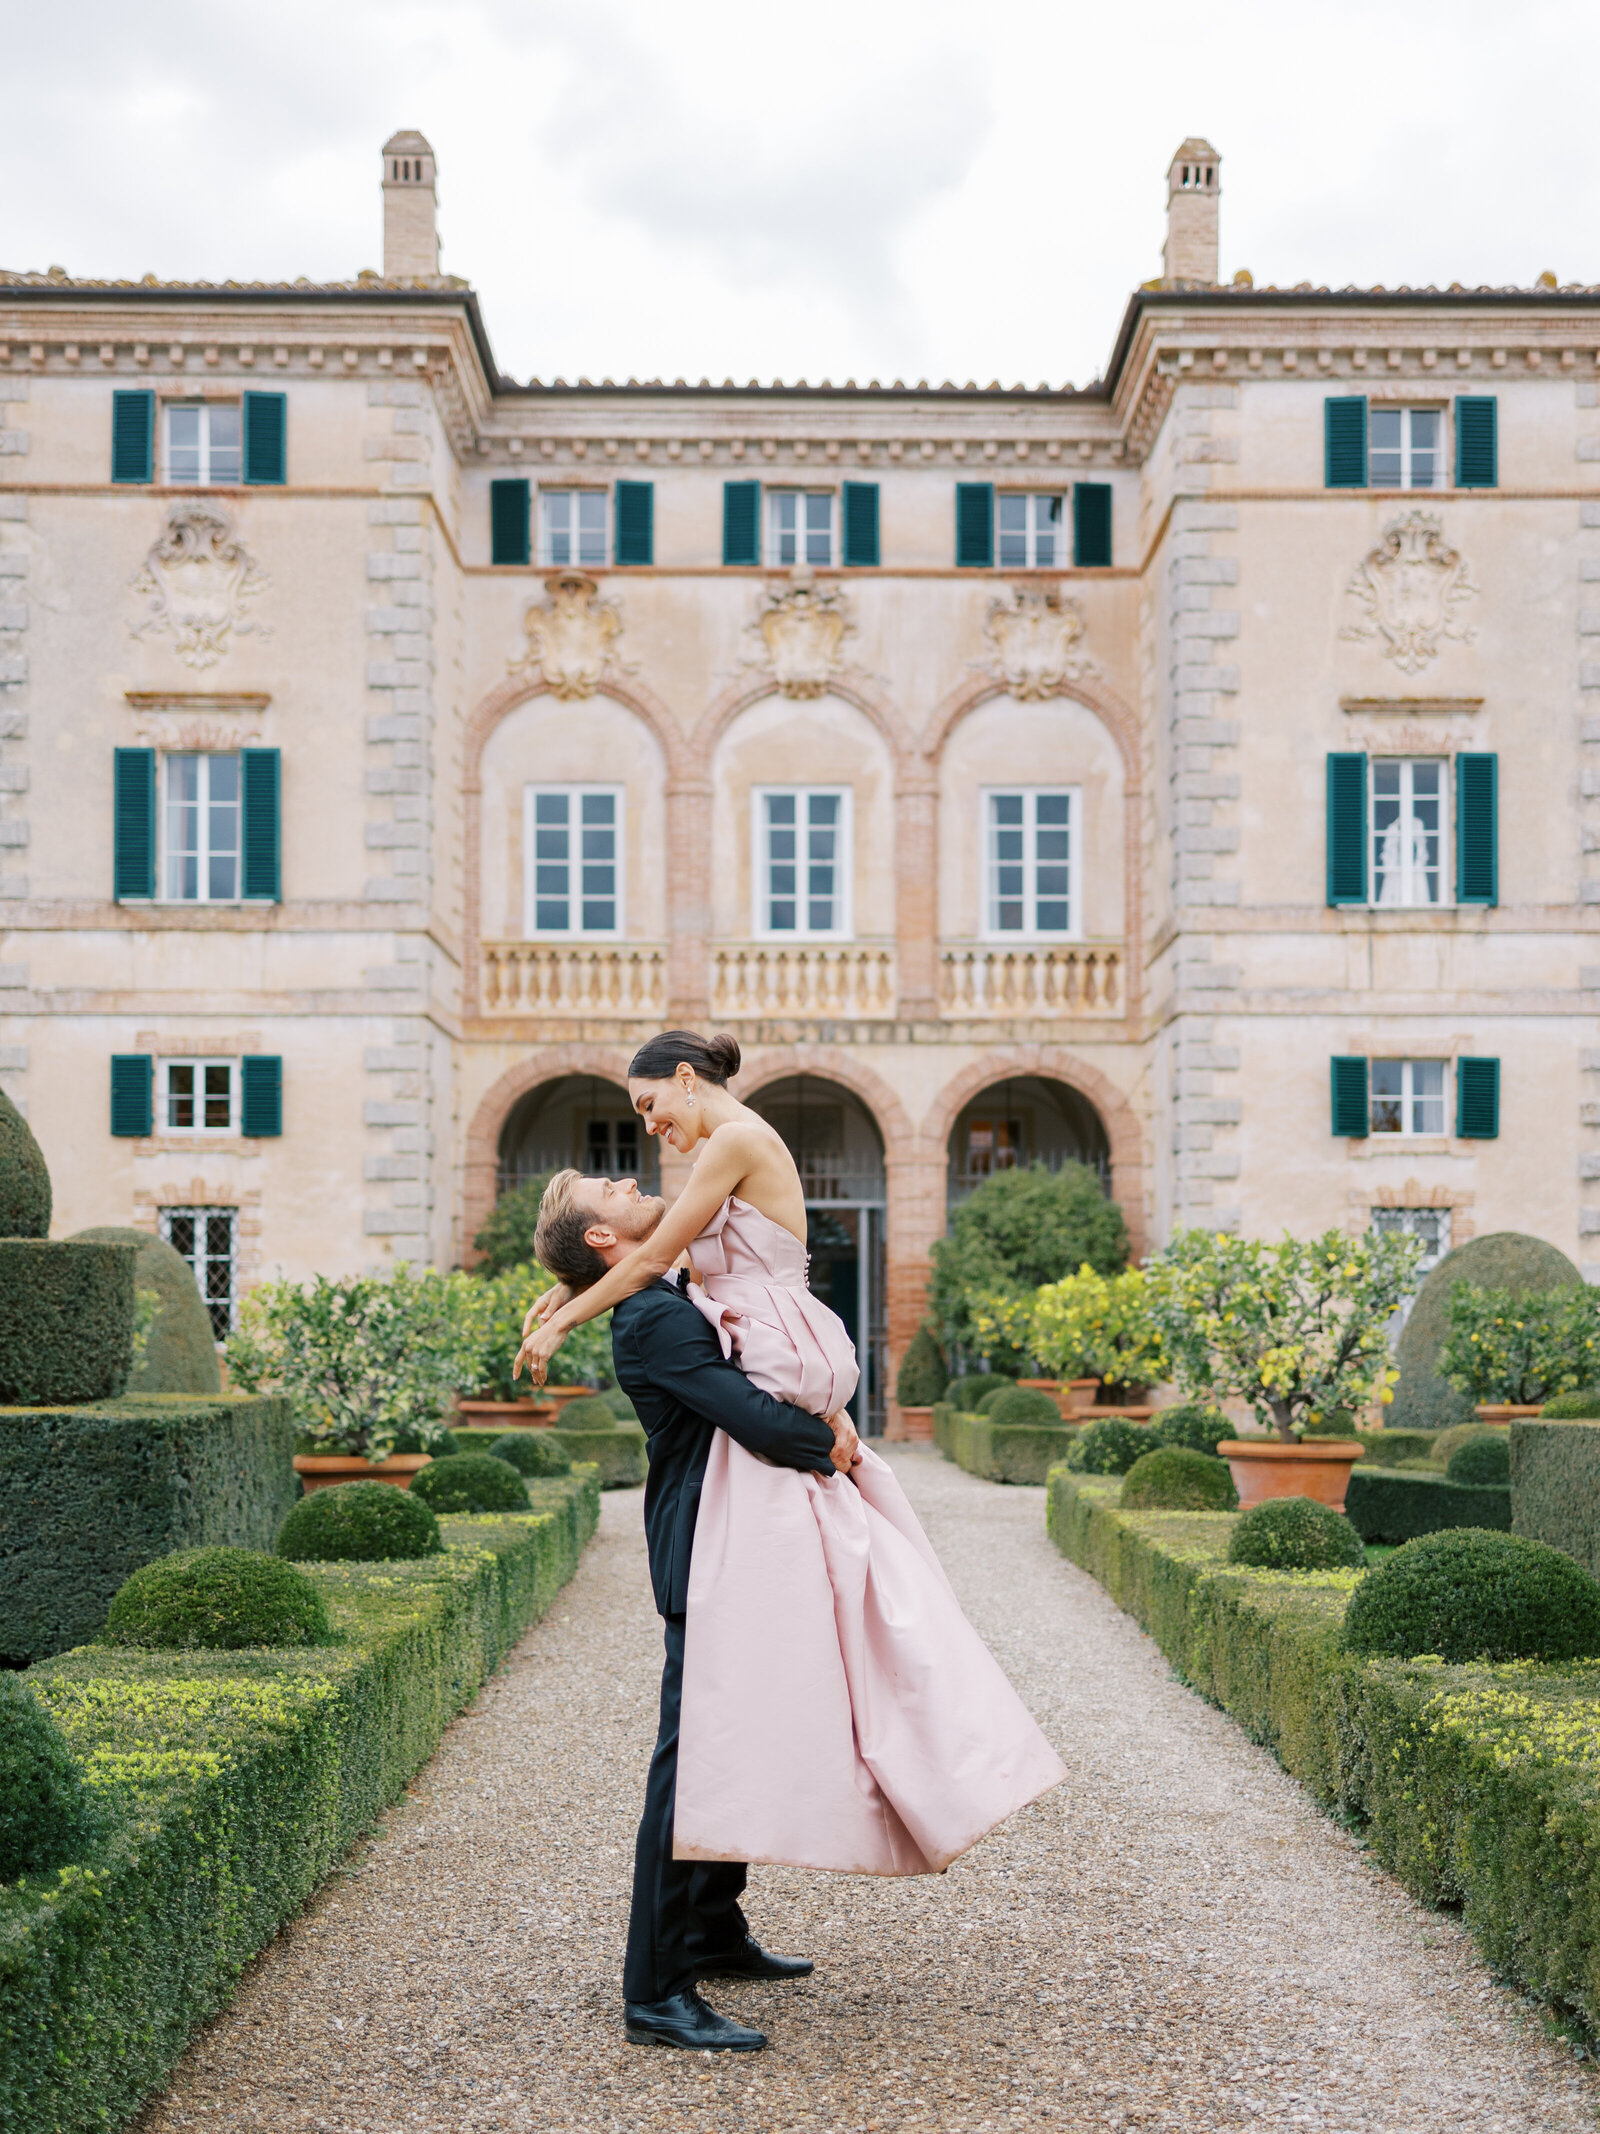 groom lifts bride in front of Villa Cetinale in black tux and pink gown on wedding day in Italy